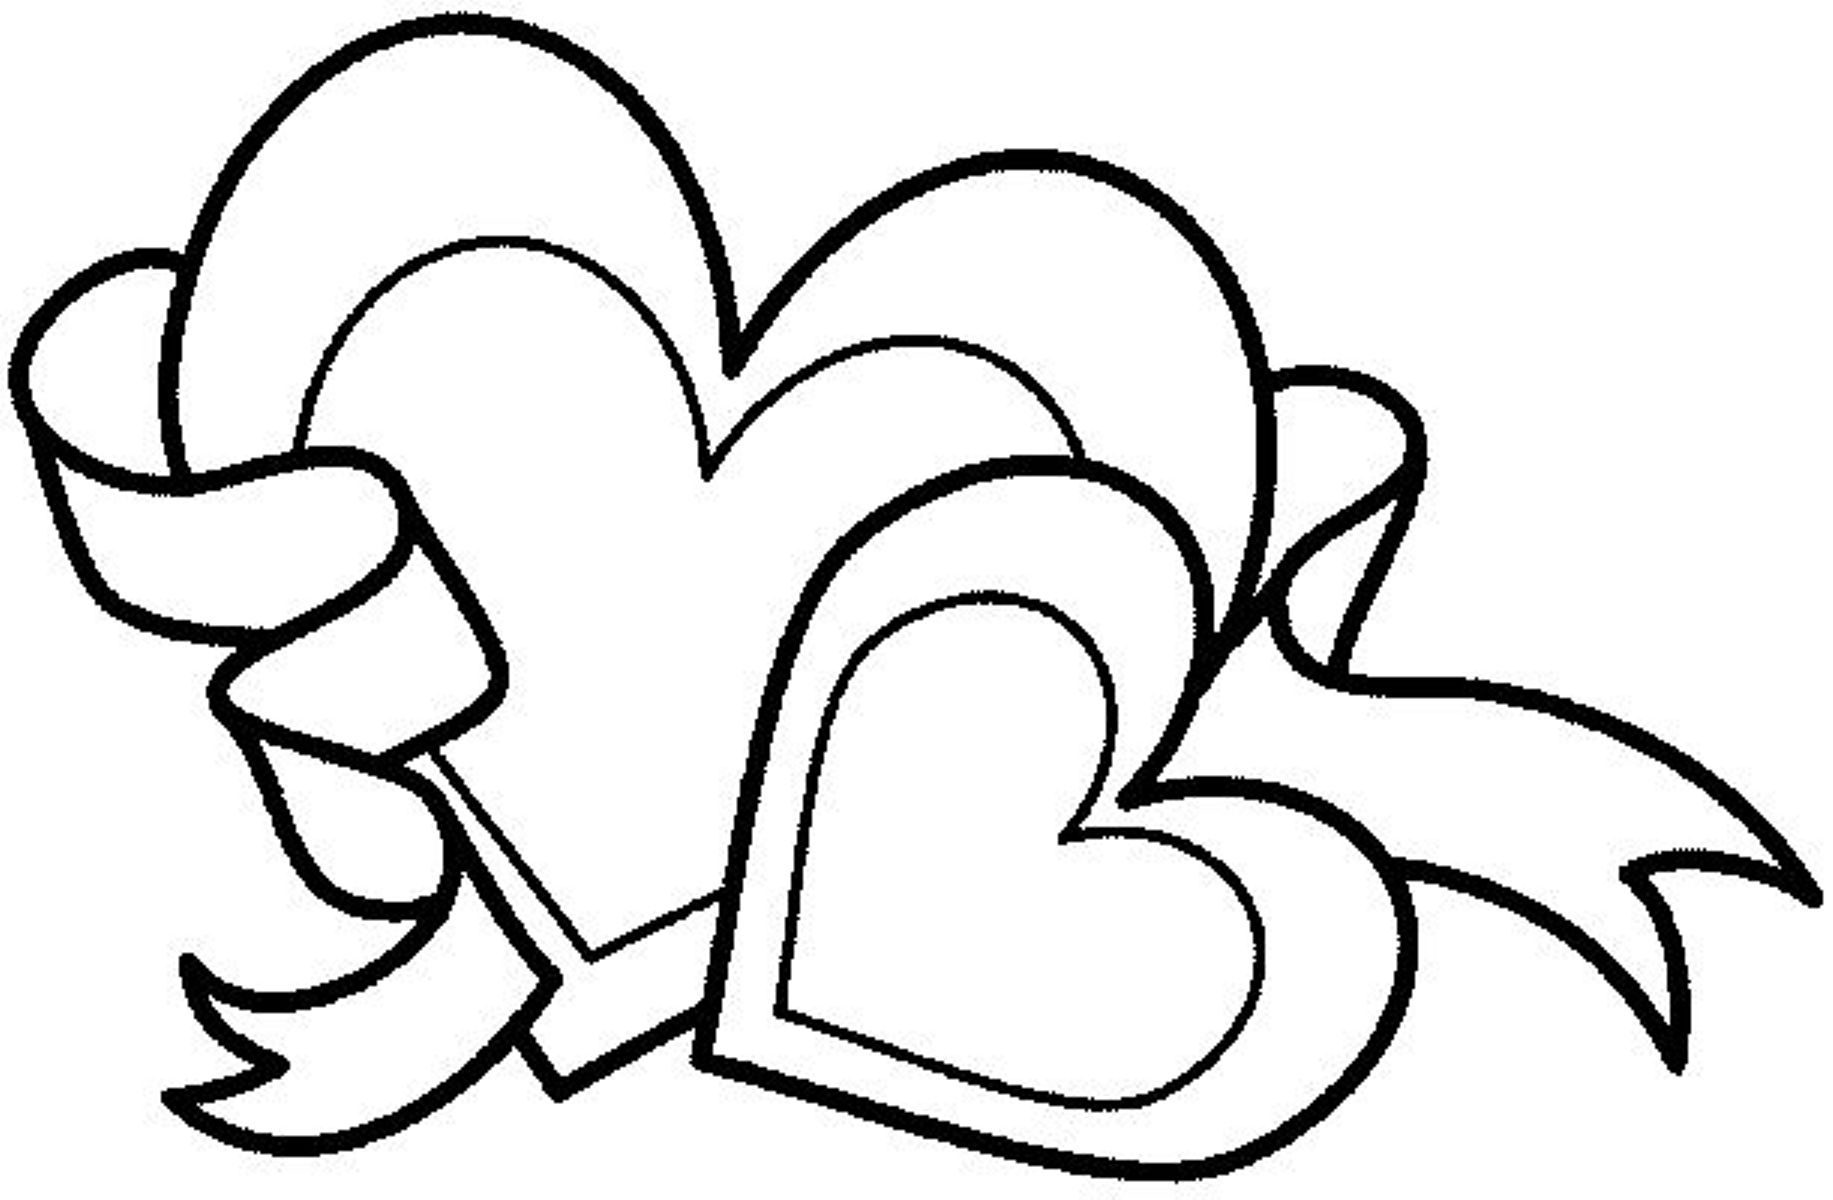 Cute Coloring Pages For Your Boyfriend at GetColorings.com | Free